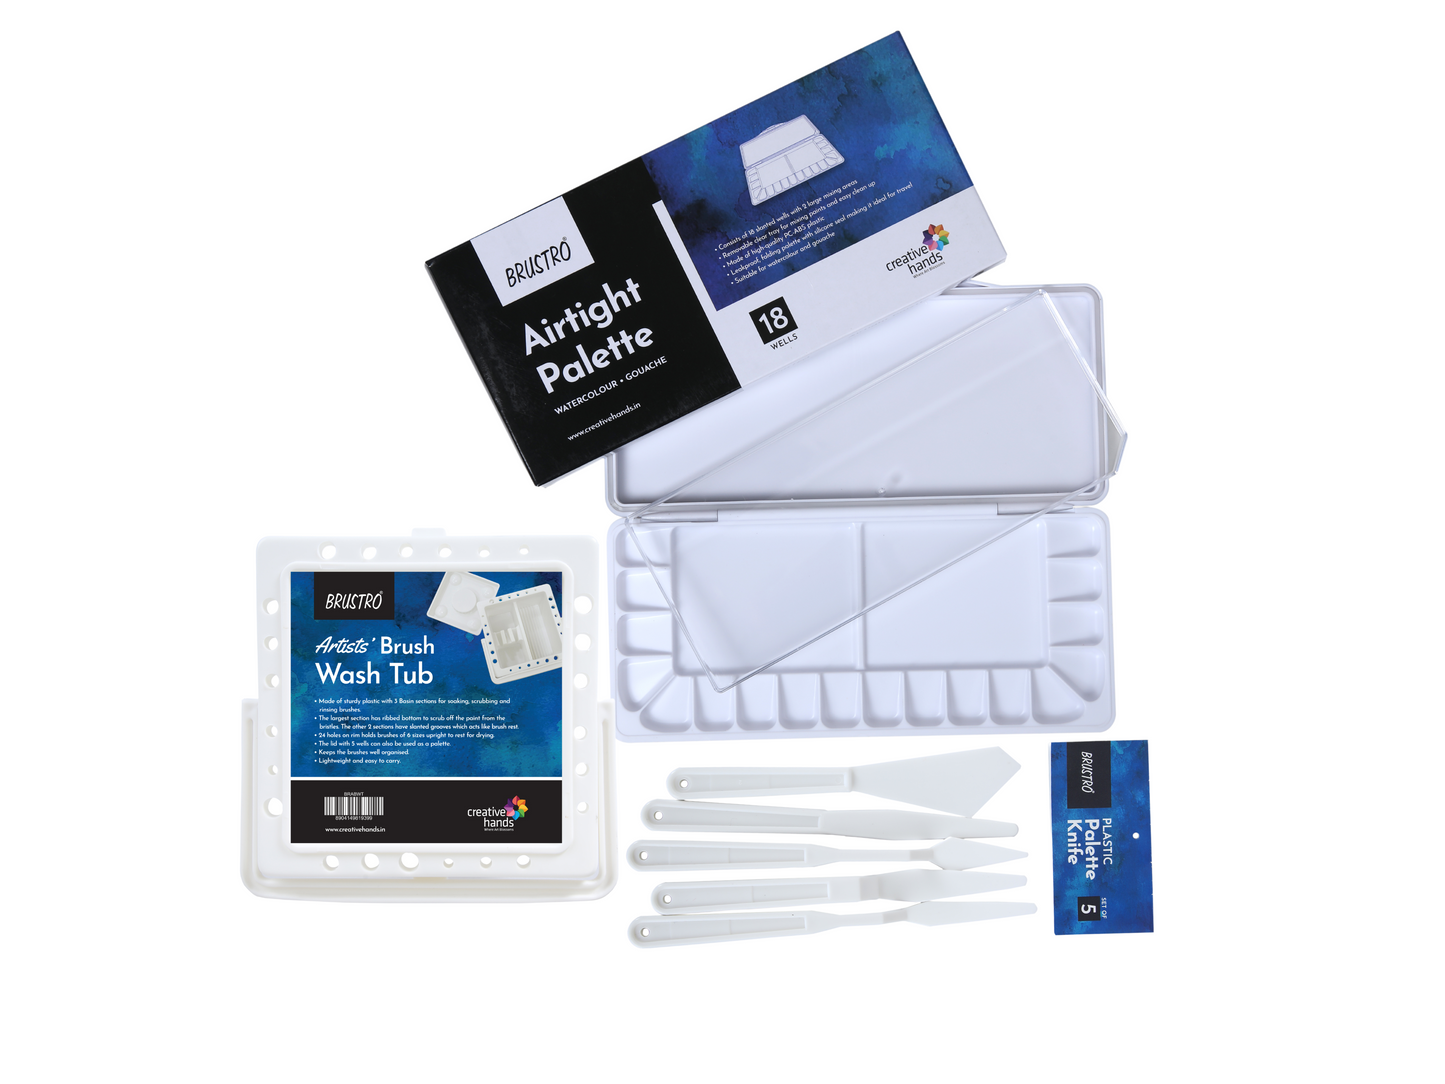 Brustro Airtight Watercolour Palette 18 Wells With Removable Trays (MRP 699)+Brustro Artists' Brush Wash Tub (MRP 240)+Brustro Plastic Palette Knives Set of 5 (MRP 150)